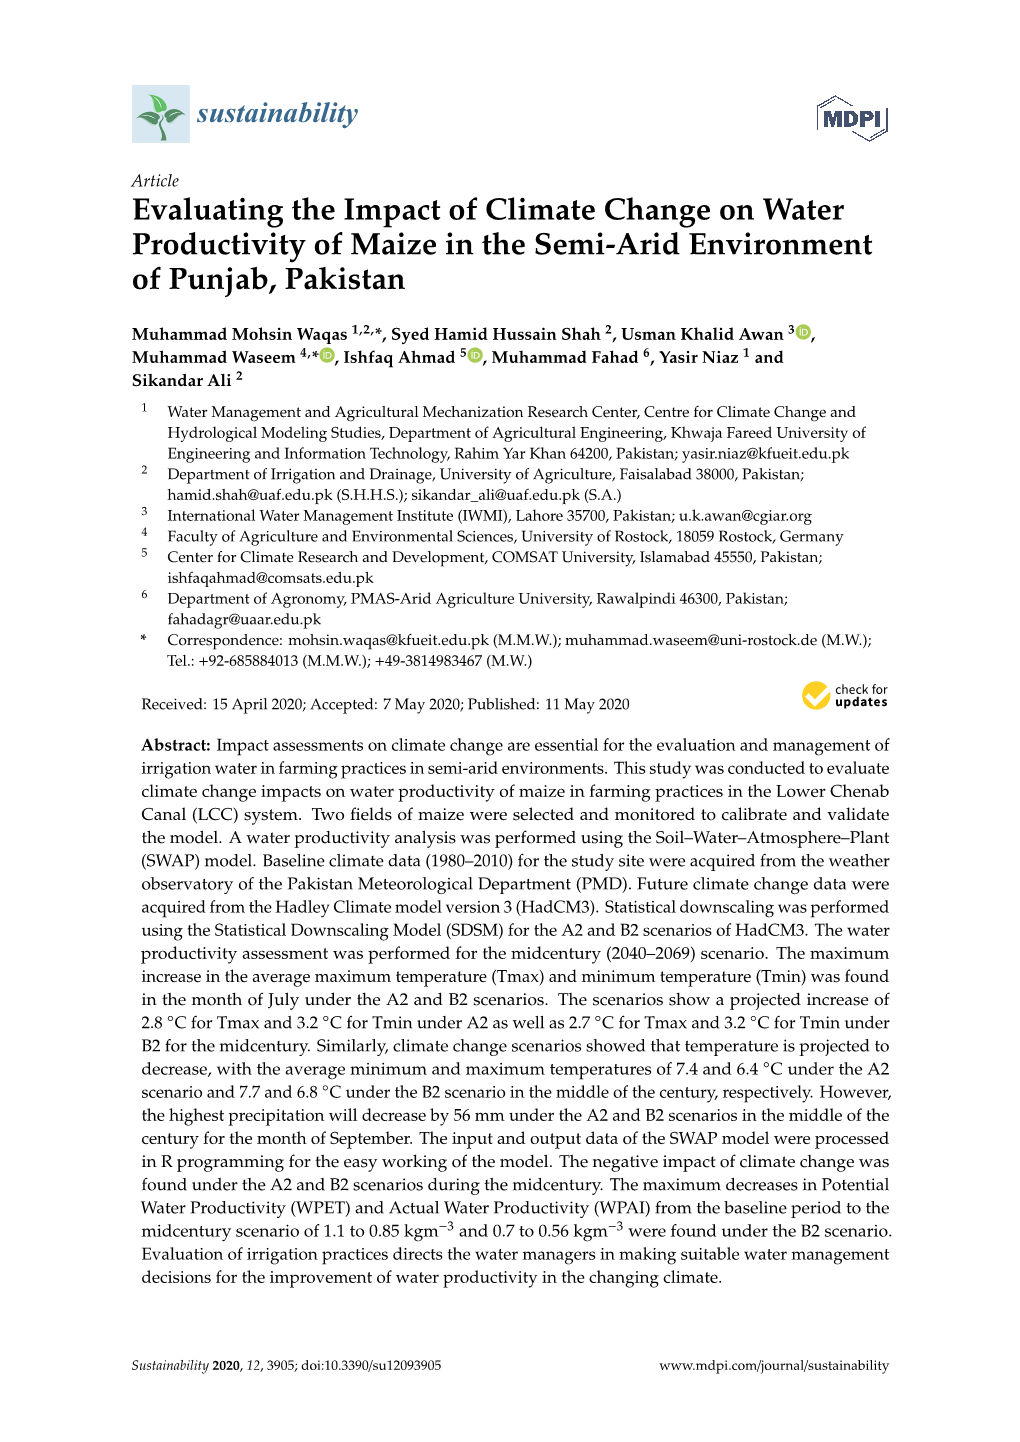 Evaluating the Impact of Climate Change on Water Productivity of Maize in the Semi-Arid Environment of Punjab, Pakistan